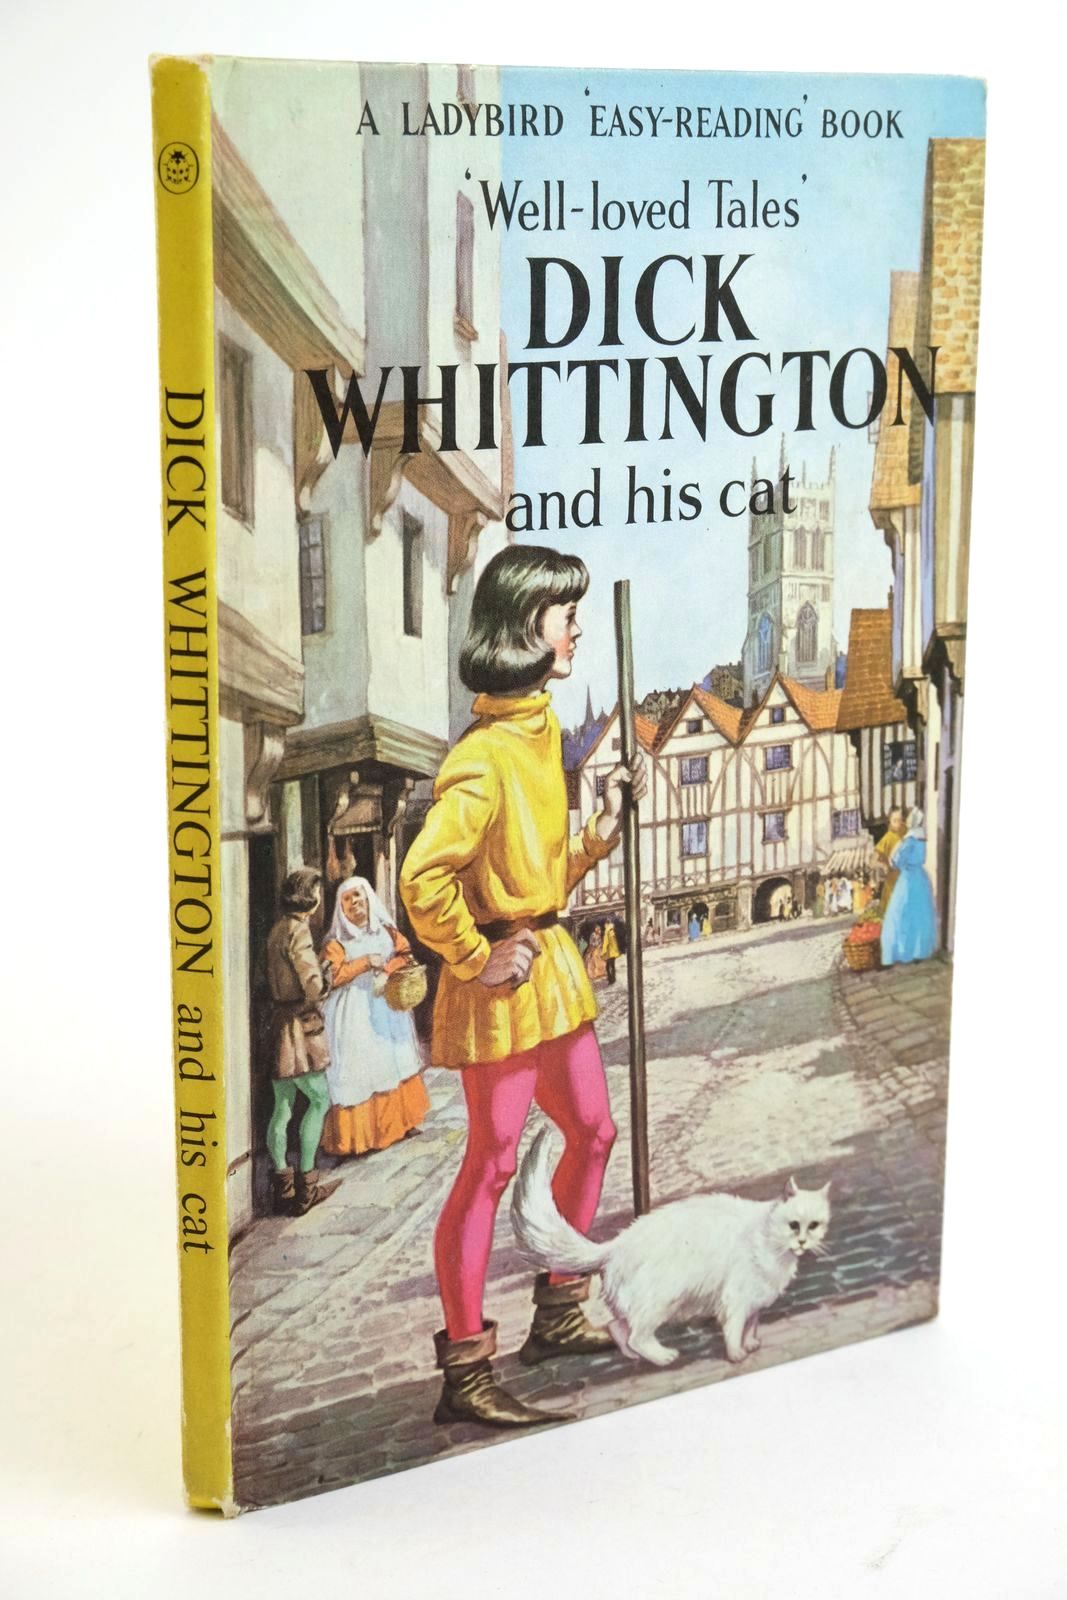 Photo of DICK WHITTINGTON AND HIS CAT written by Southgate, Vera illustrated by Winter, Eric published by Wills & Hepworth Ltd. (STOCK CODE: 1322102)  for sale by Stella & Rose's Books